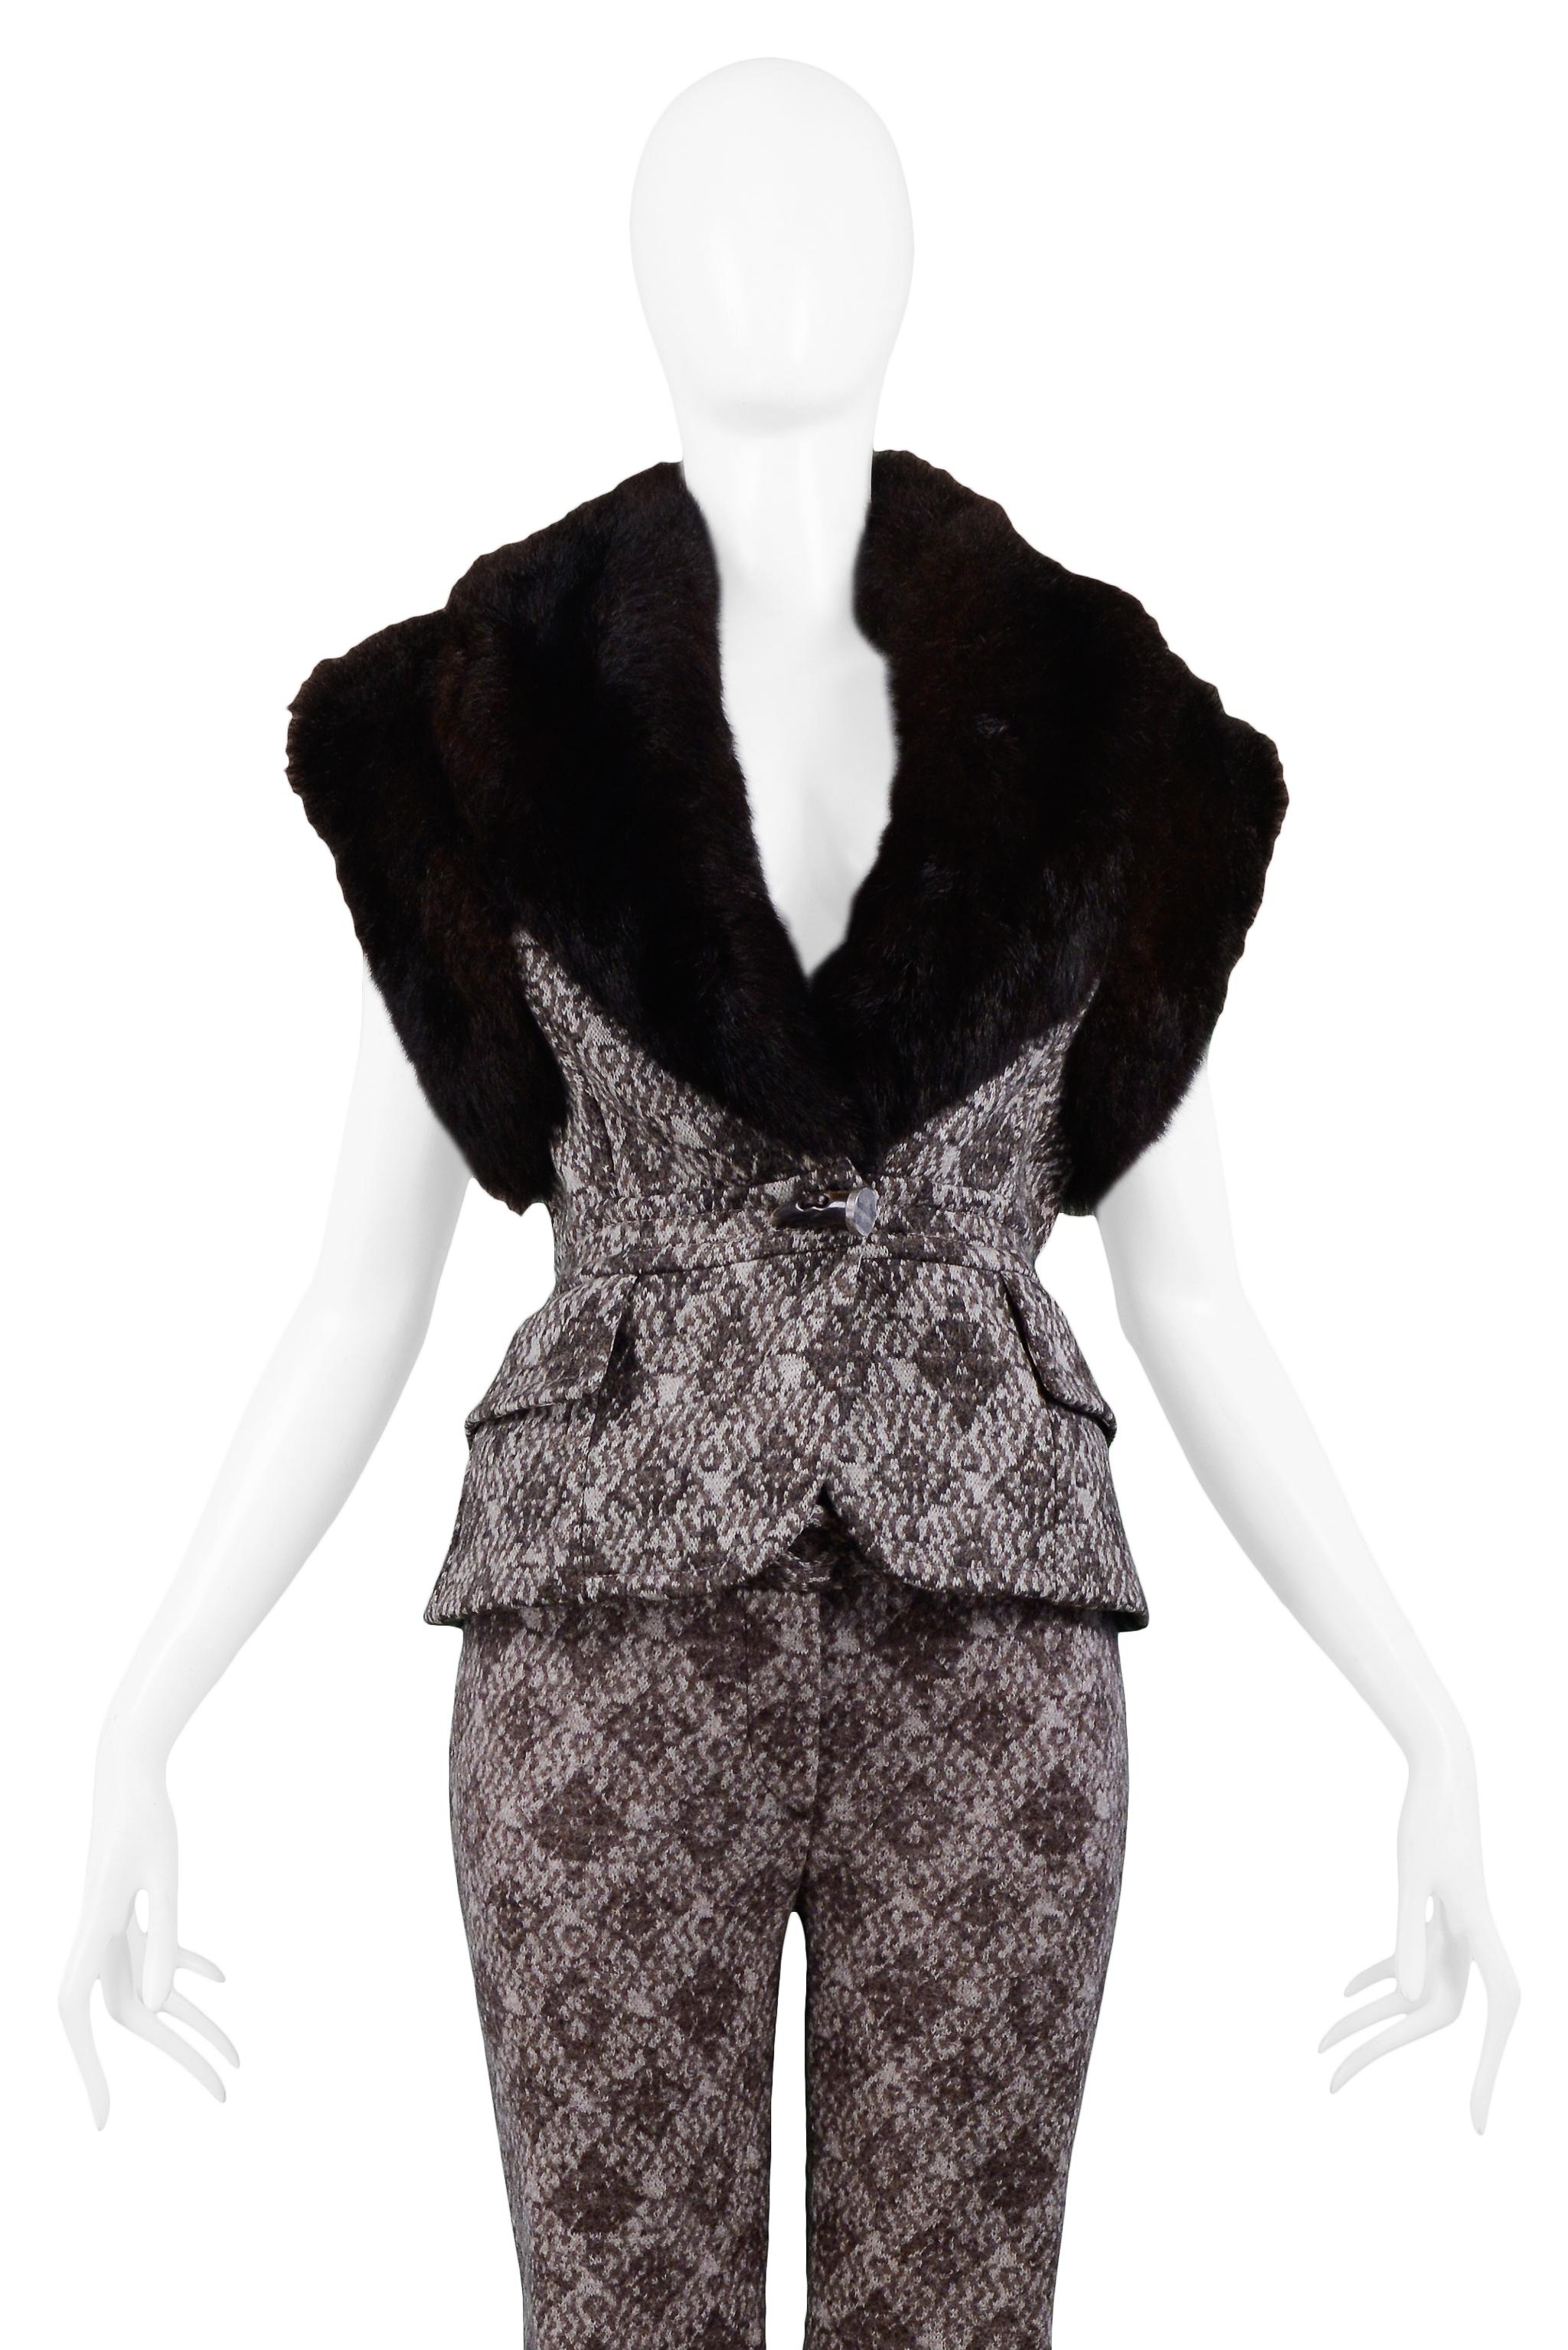 Gianfranco Ferre Brown Fur & Geometric Print Vest and Pants Ensemble 2006 In Excellent Condition For Sale In Los Angeles, CA